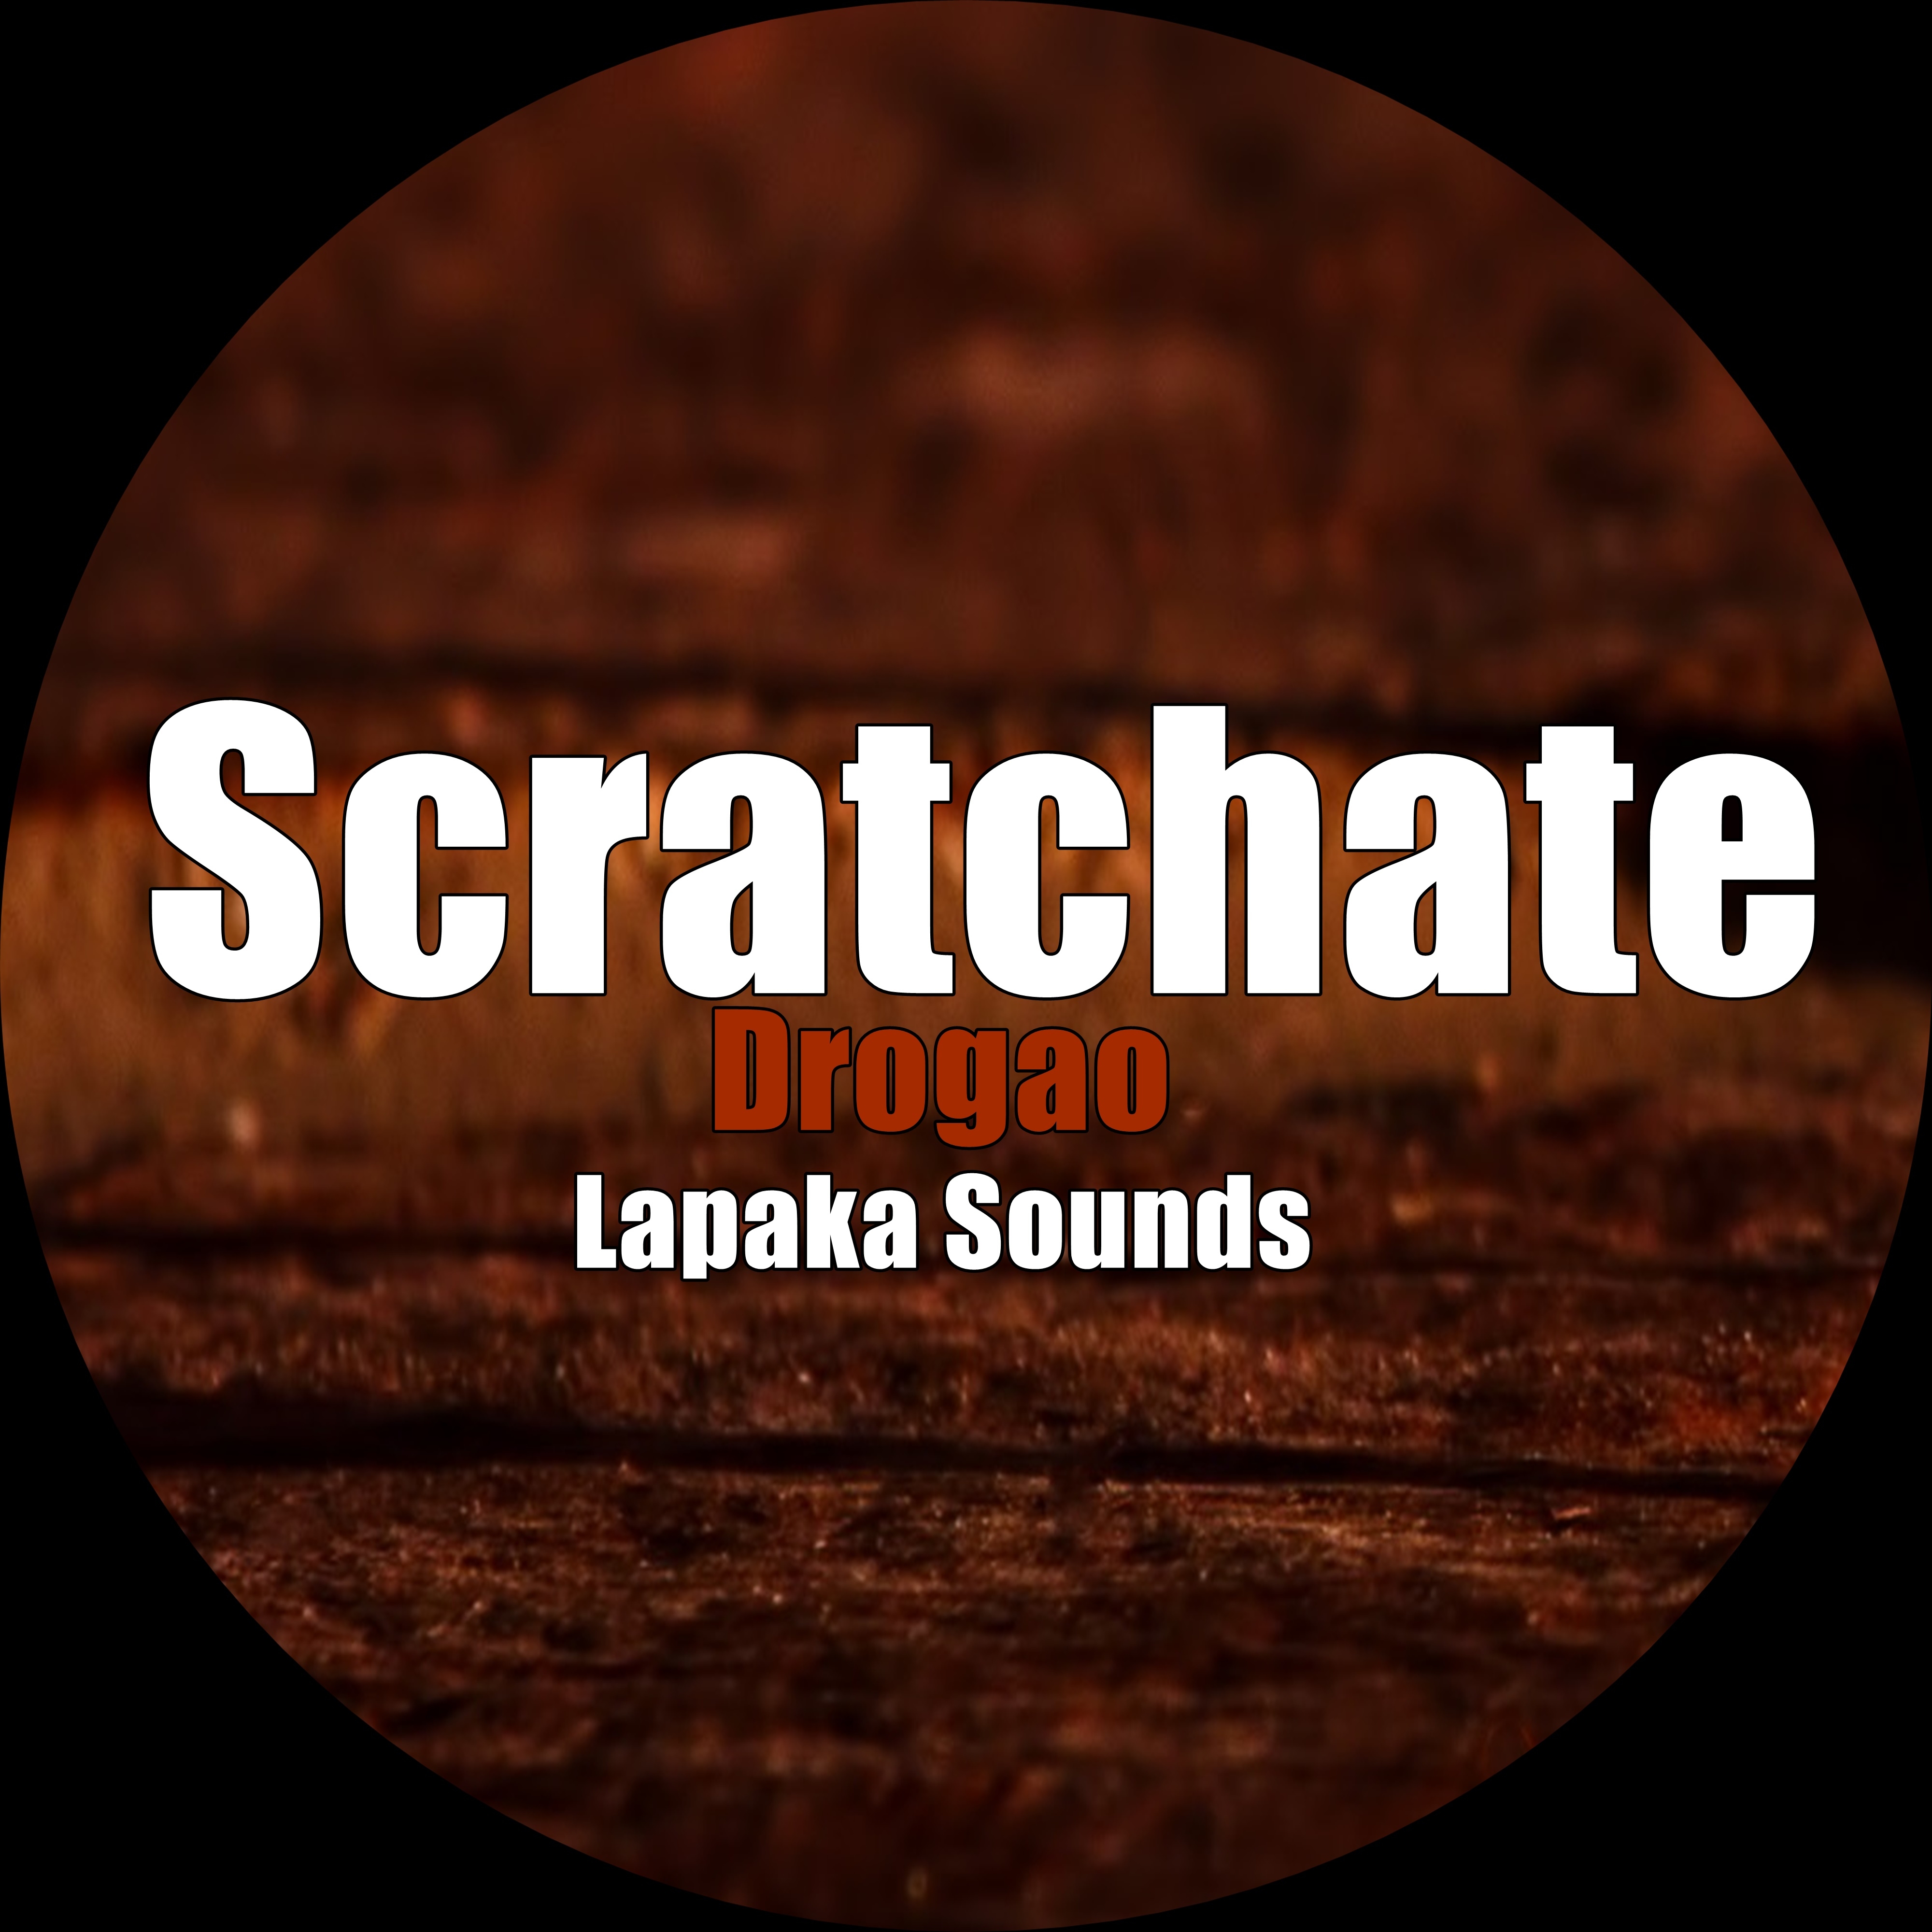 Scratchate